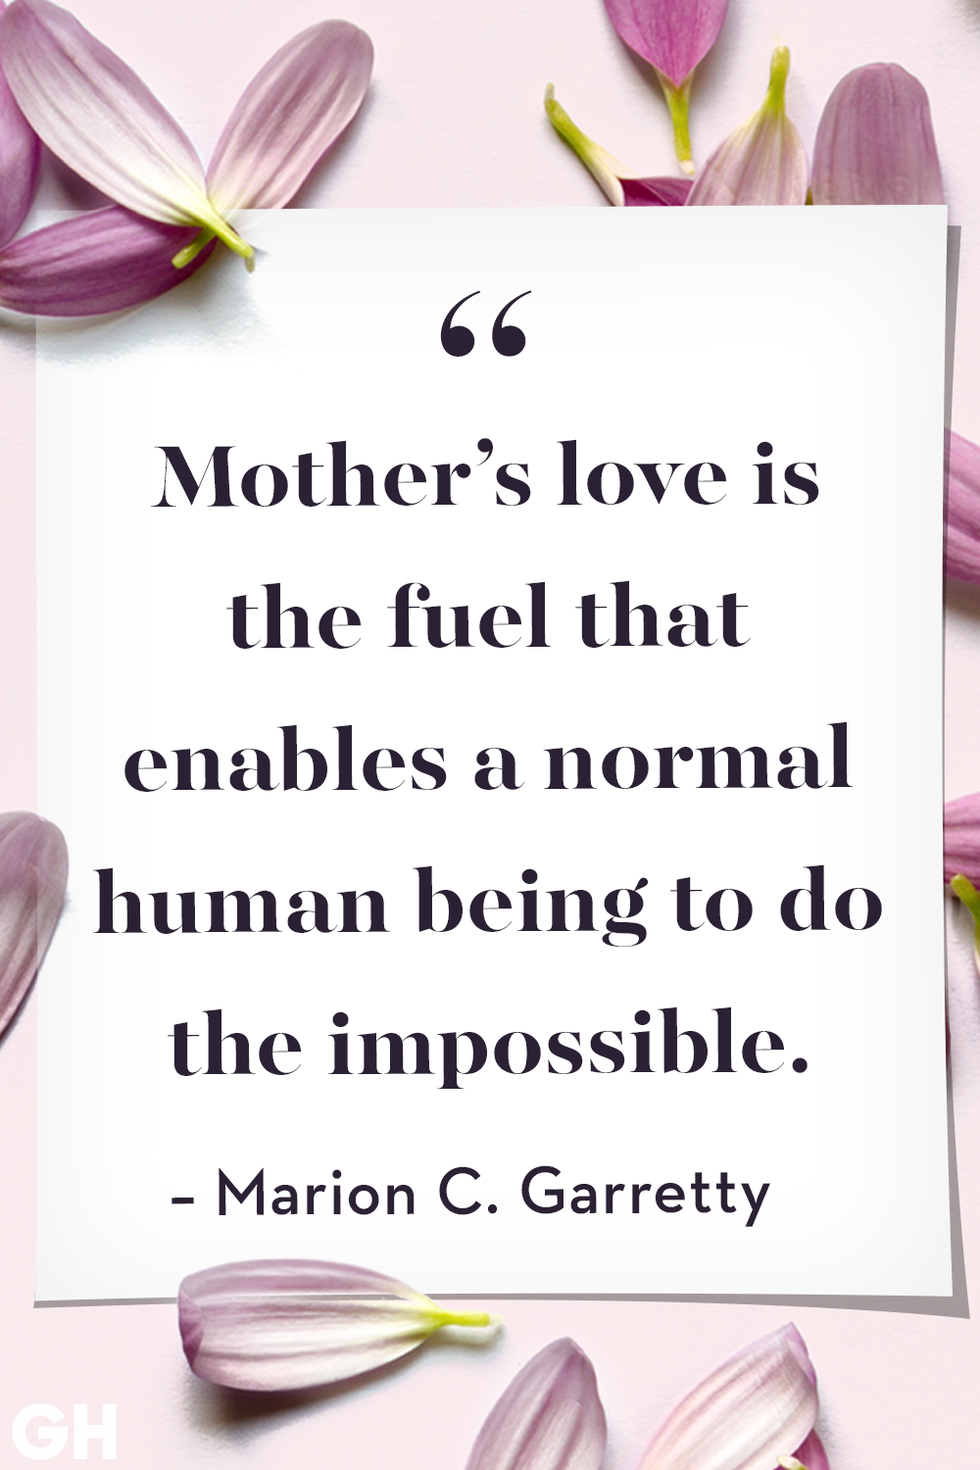 https://hips.hearstapps.com/hmg-prod/images/mothers-day-quotes-marion-c-garretty-1645047919.png?crop=1xw:1xh;center,top&resize=980:*